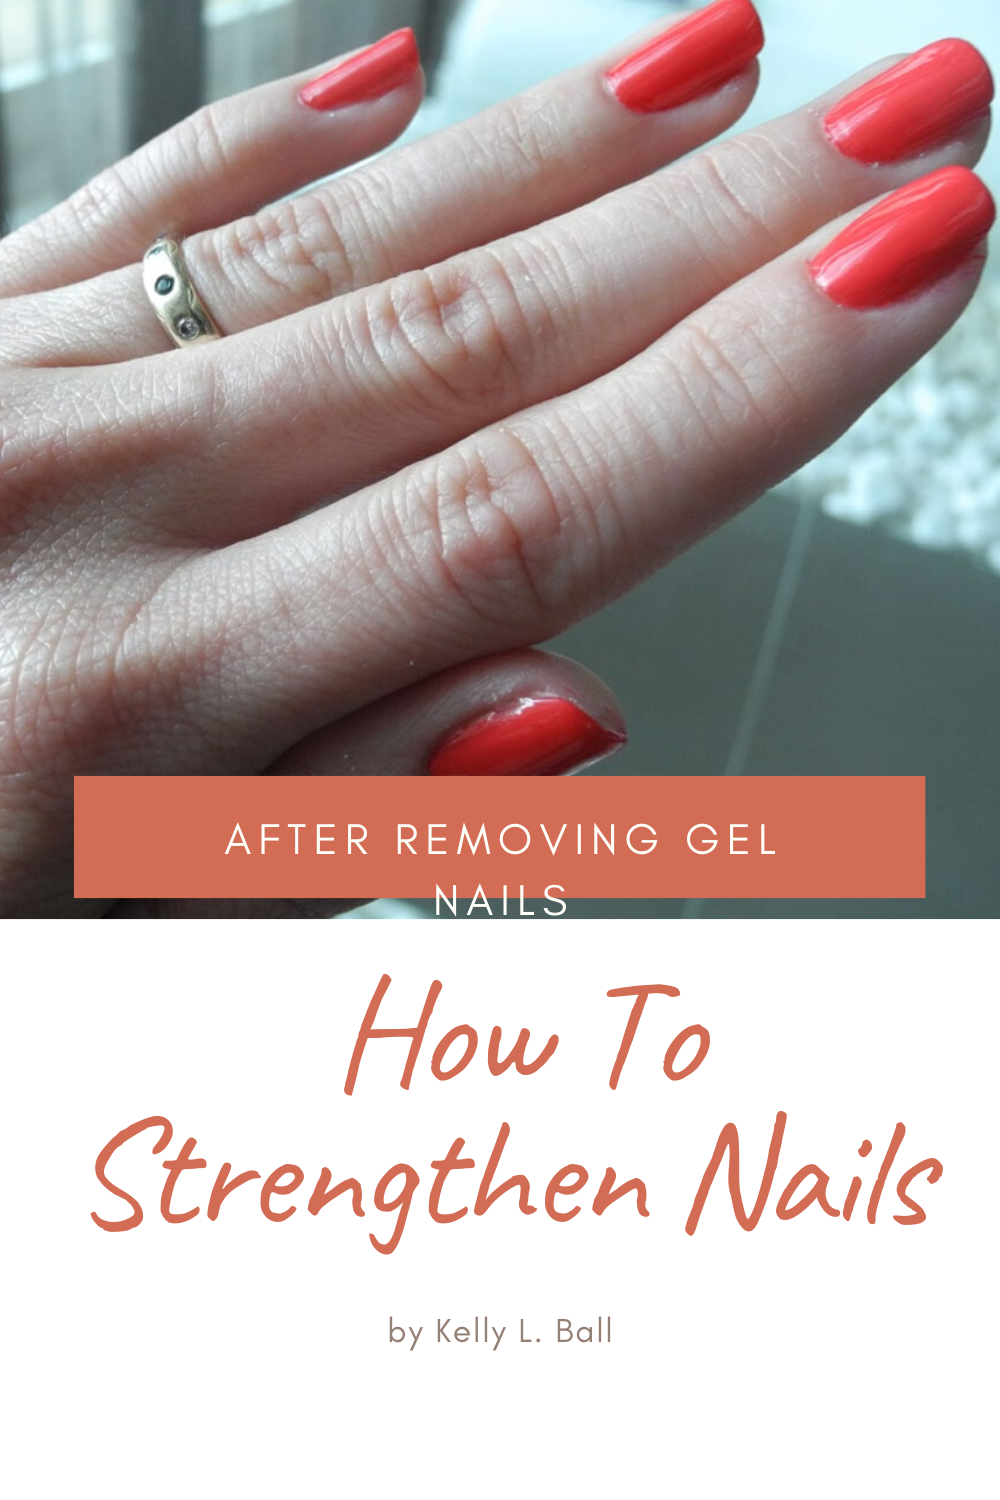 How To Strengthen Nails After Removing Gel Nails